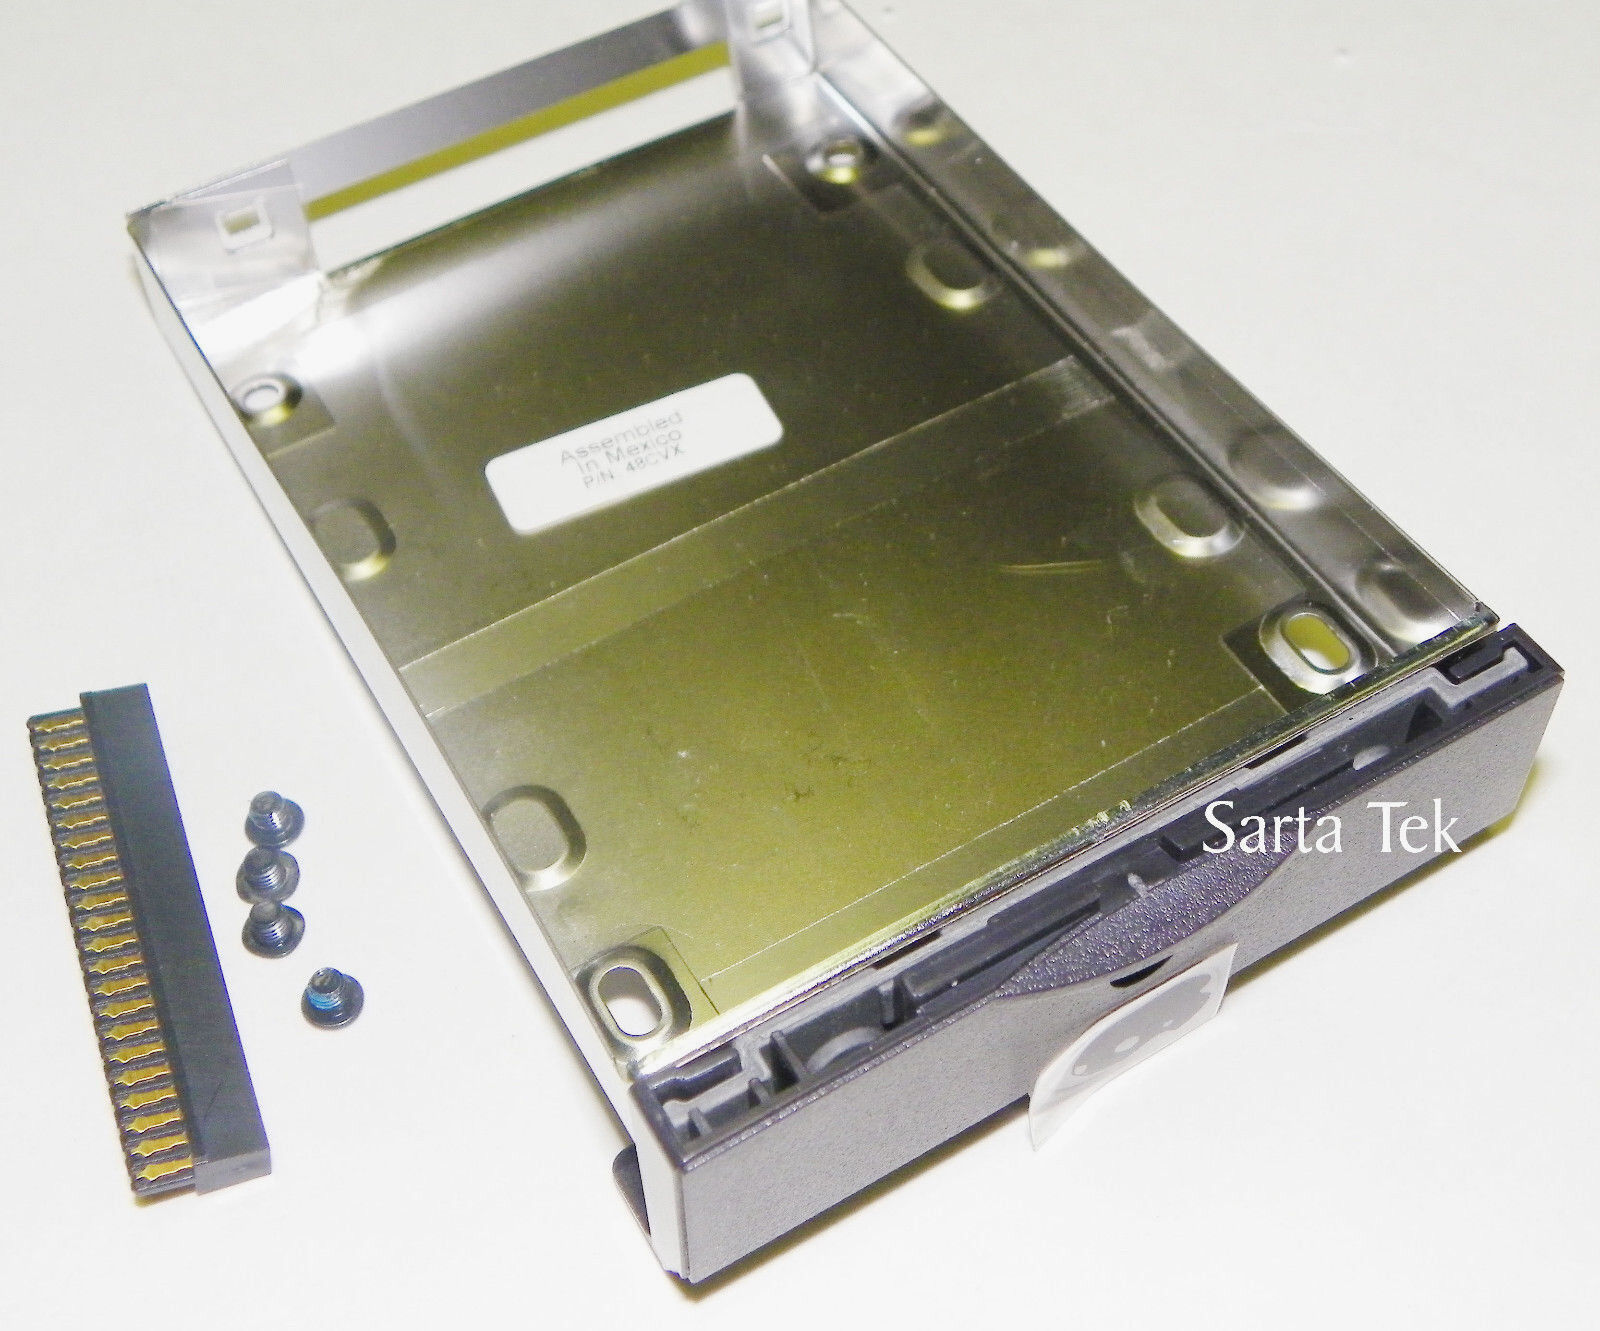 Dell Inspiron 8000 8100 8200 2500 M40 M50 Hard Drive Caddy 48cvx With connector